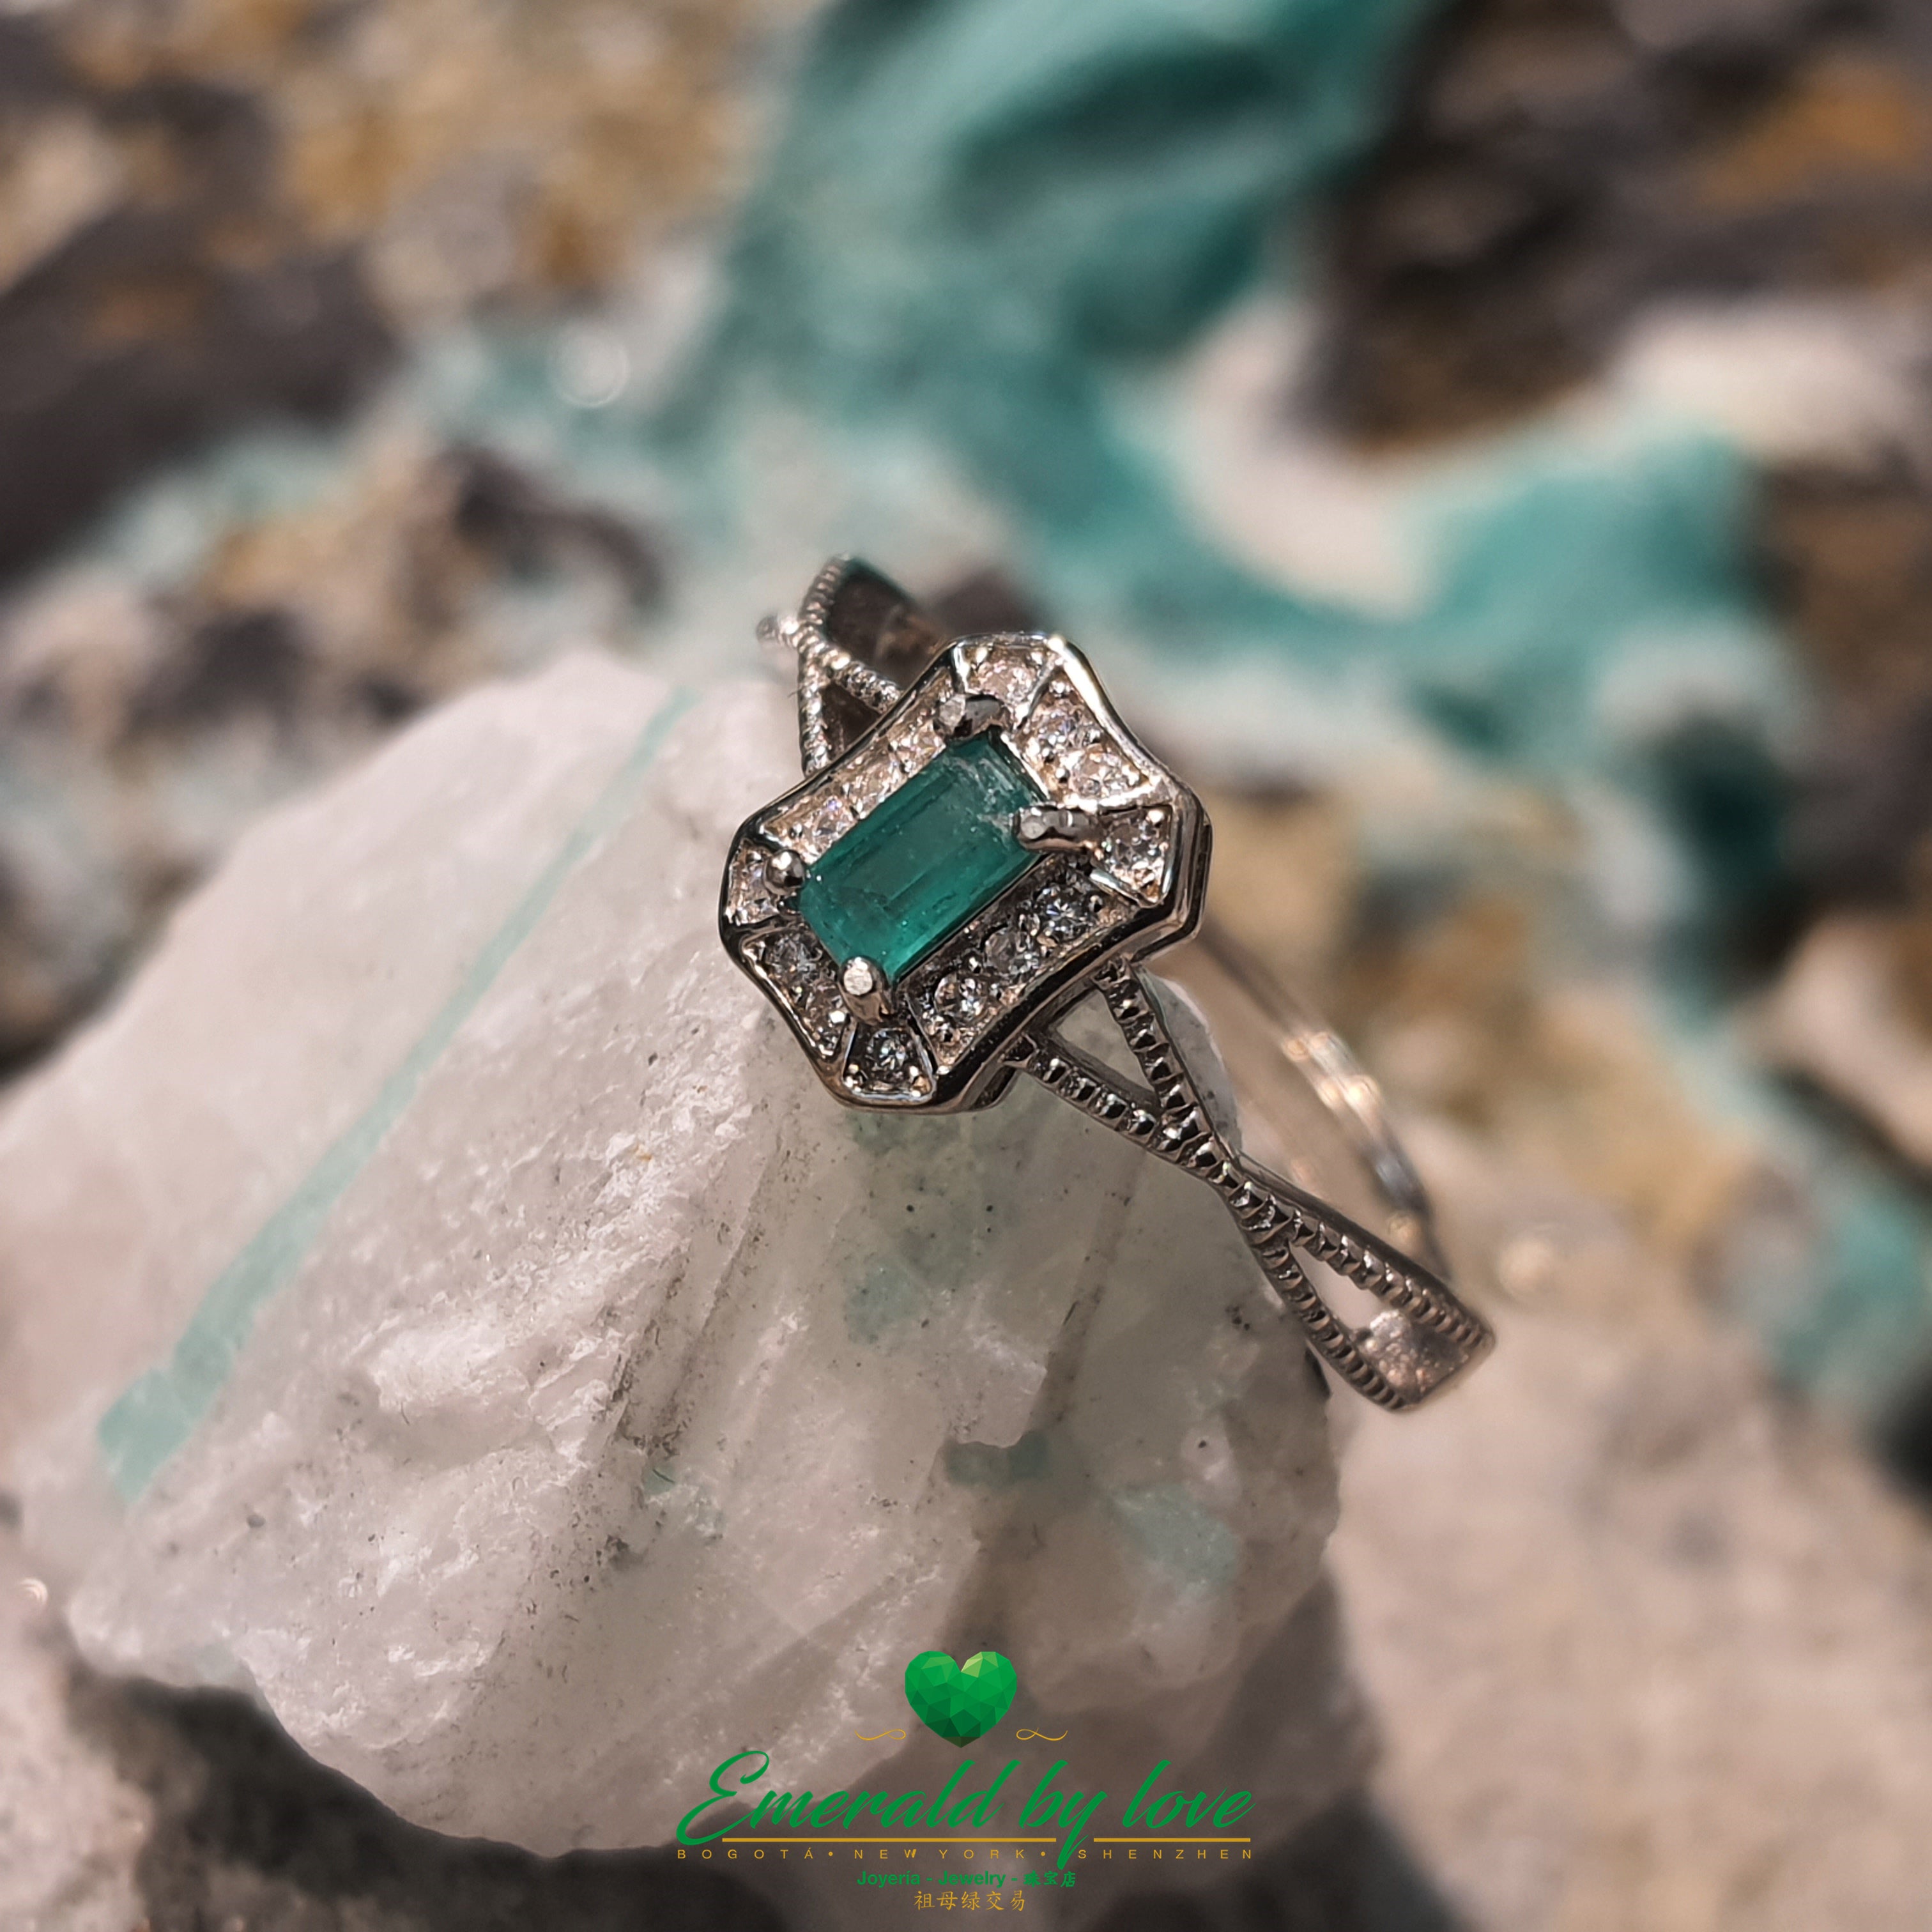 Crossed Band Ring with Rectangular Marquise and Baguette Emerald: Contemporary Chic